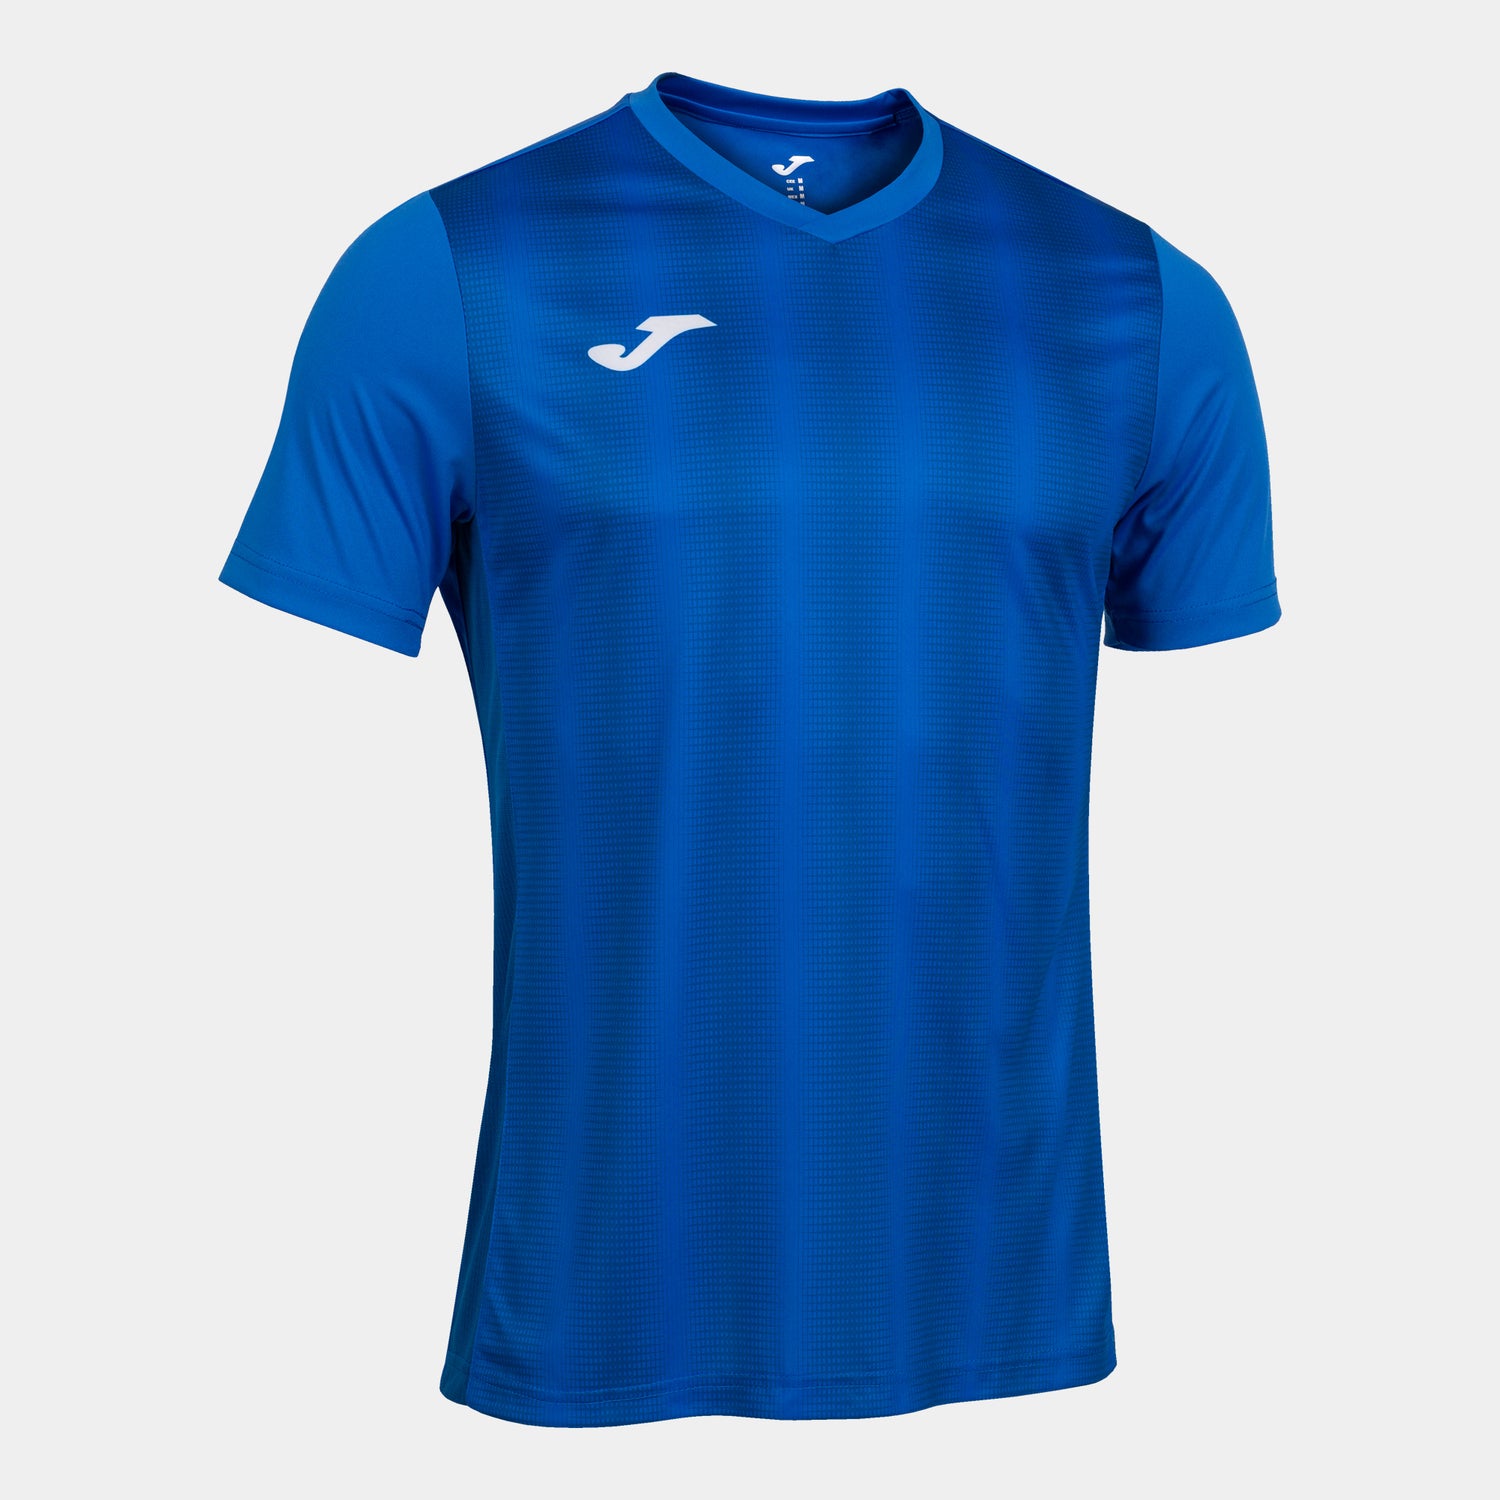 Joma Soccer Jersey available in Joma Canada Store. Customize your teamwear with sponsors and numbers. Joma is shipping in Canada. For club offers contact us.